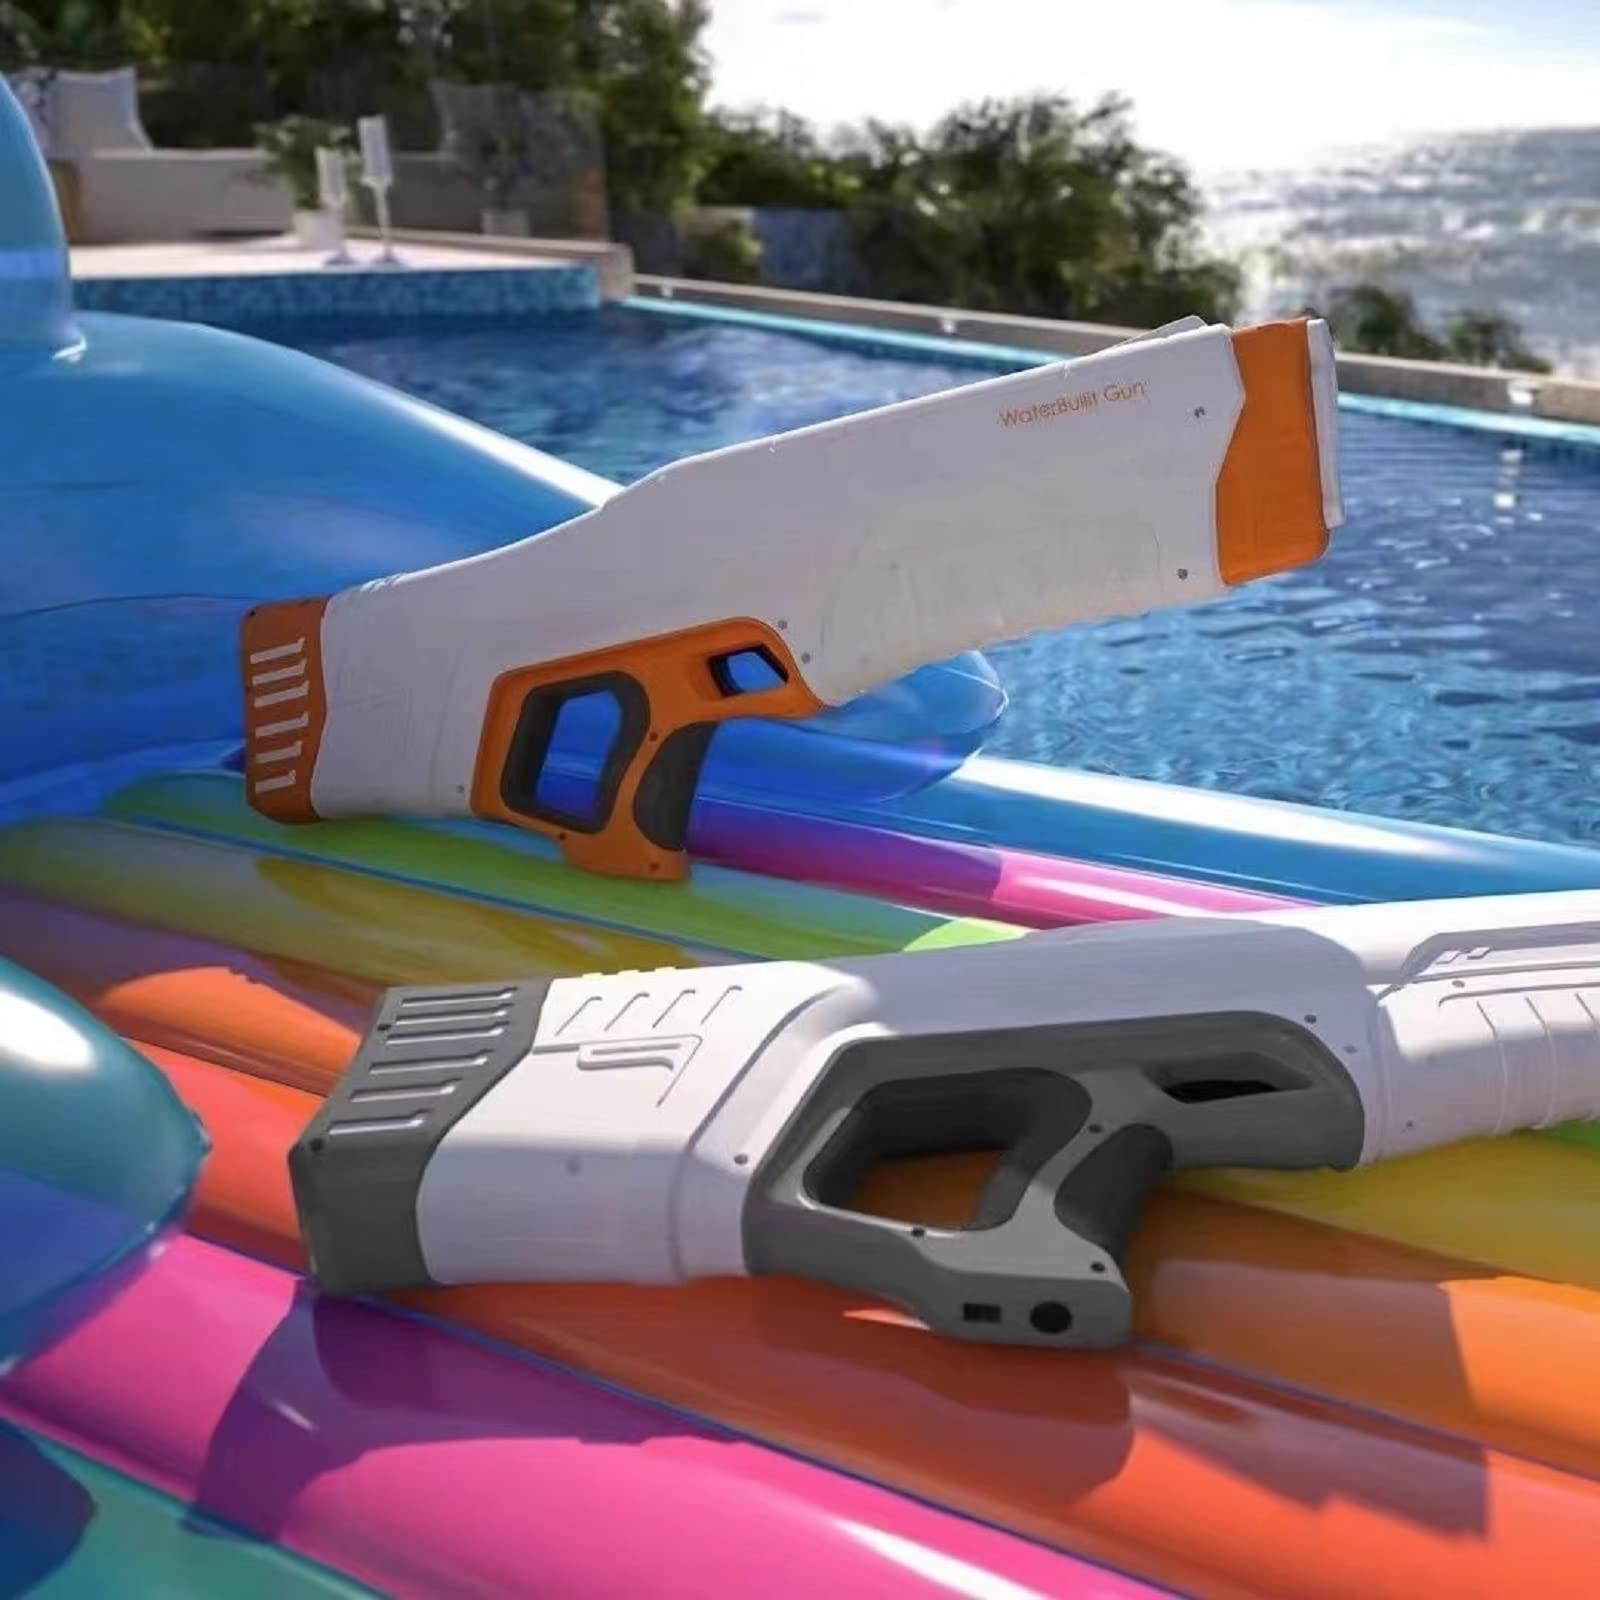 Spyra One Water Gun, The next generation of water guns. by Spyra, SpyraLX Outdoor Water Toys, Spyra Two Water Squirting Toys.